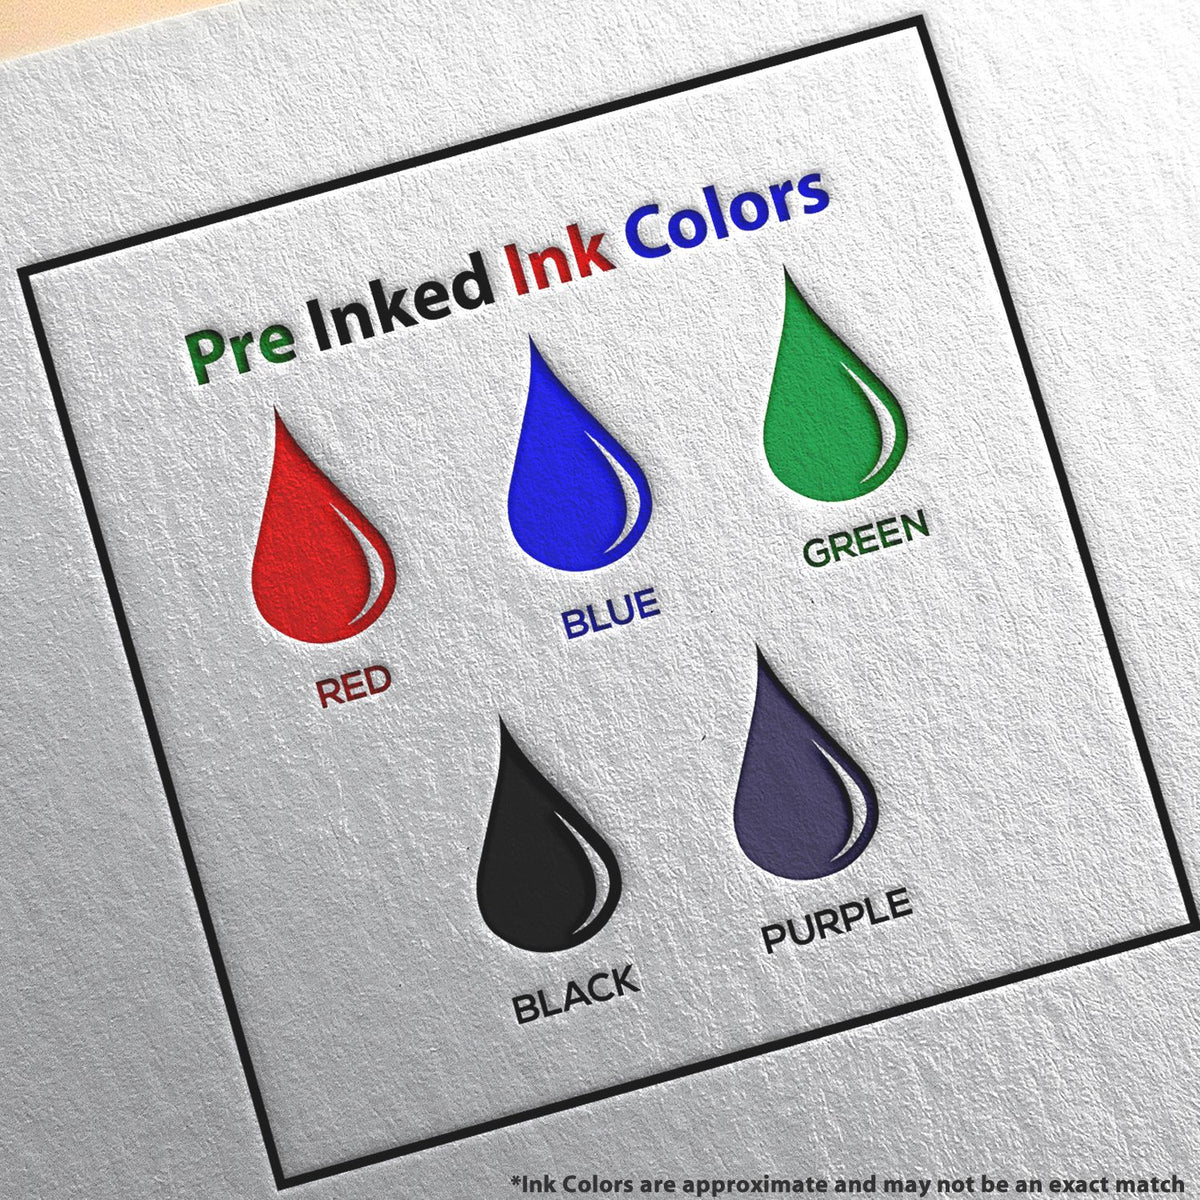 A picture showing the different ink colors or hues available for the Premium MaxLight Pre-Inked Virginia Engineering Stamp product.